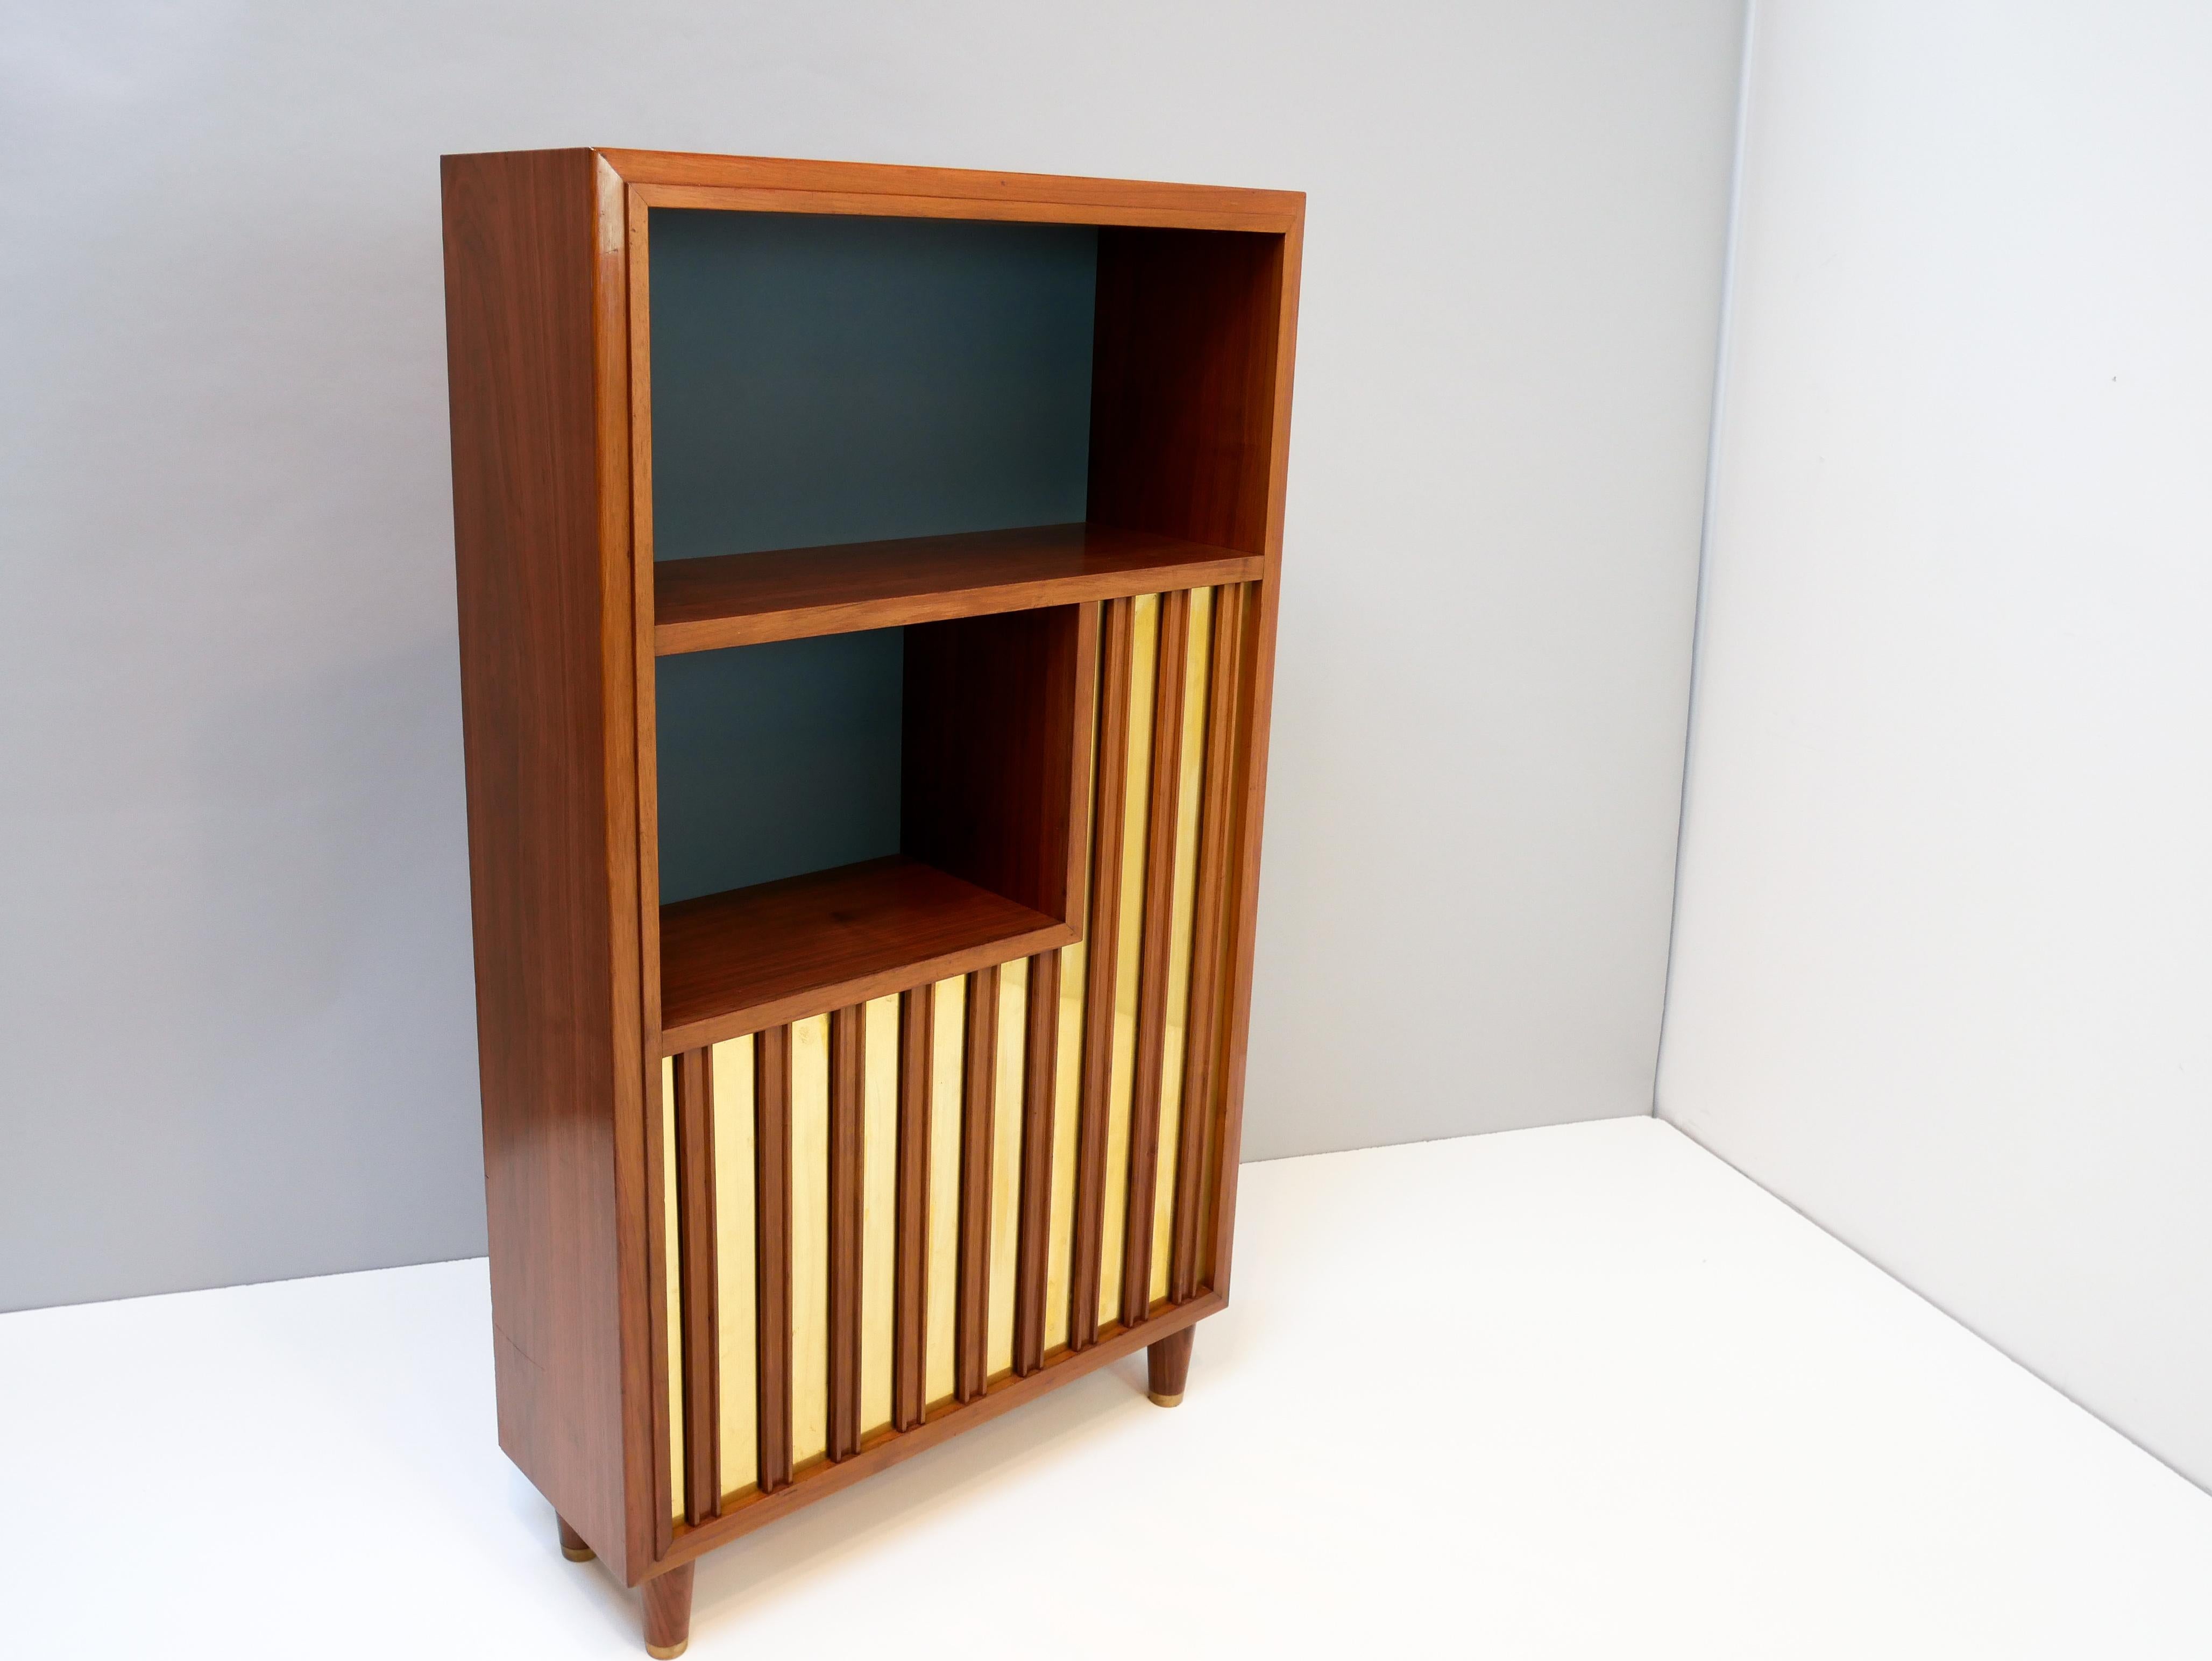 Bookcase/ Decorative Storage, Swedish Modern with Relief Front, 1940s For Sale 1